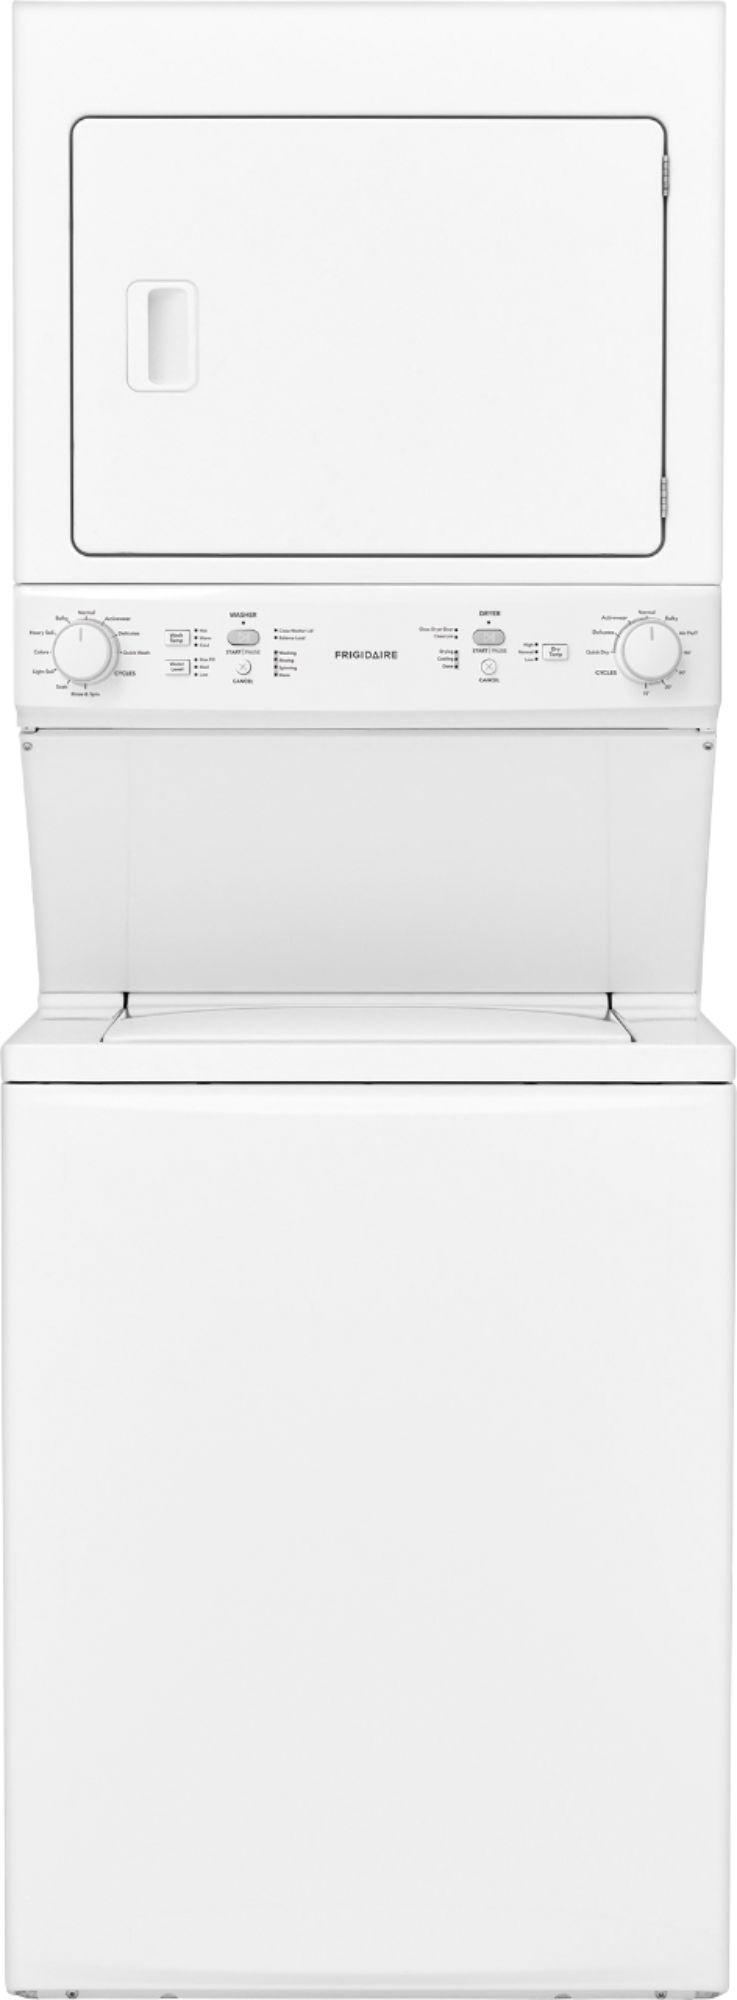 Frigidaire - 3.9 Cu. Ft. 10-Cycle Washer and 5.5 Cu. Ft. 4-Cycle Dryer Gas Laundry Center - White